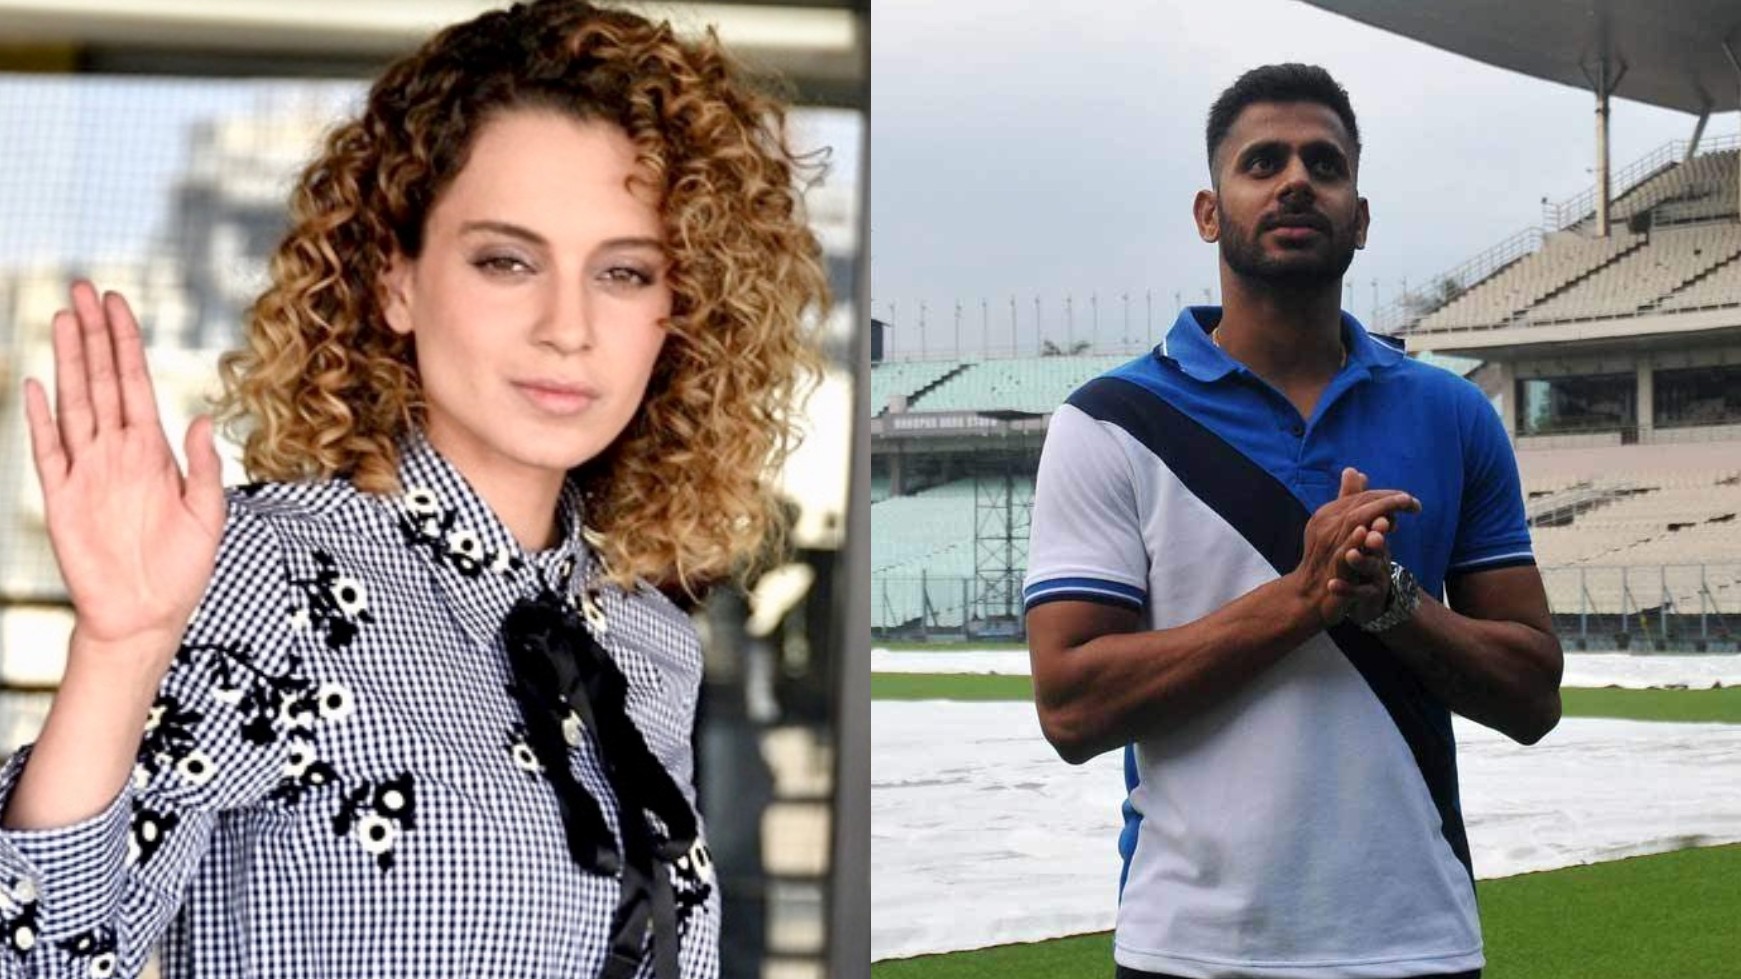 Manoj Tiwary defends Kangana Ranaut; says people attacking her are showing their true colors